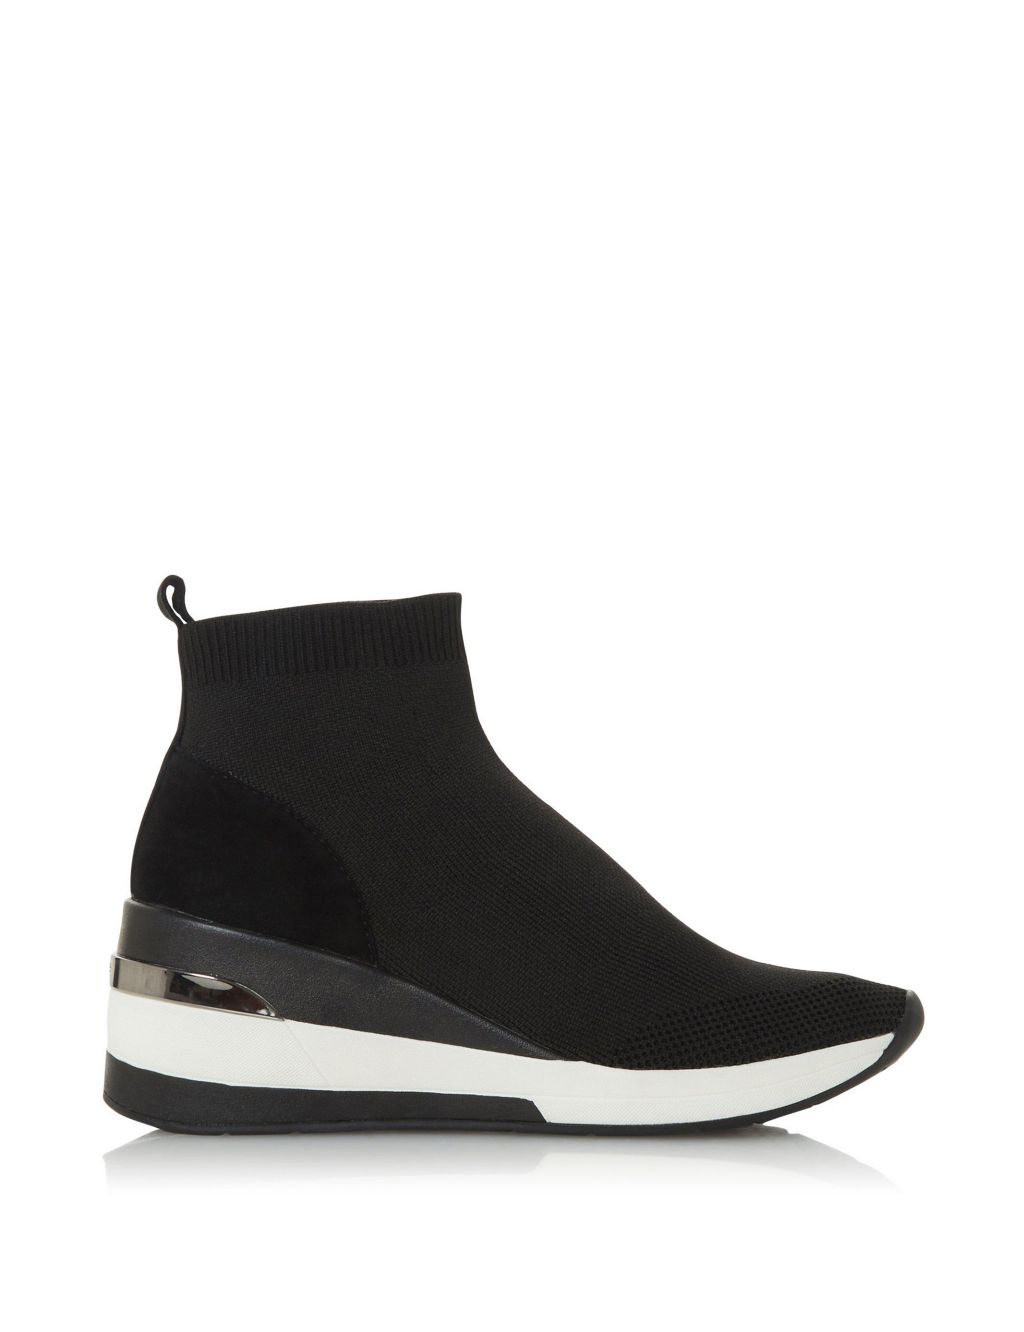 Slip On High Top Trainers image 1